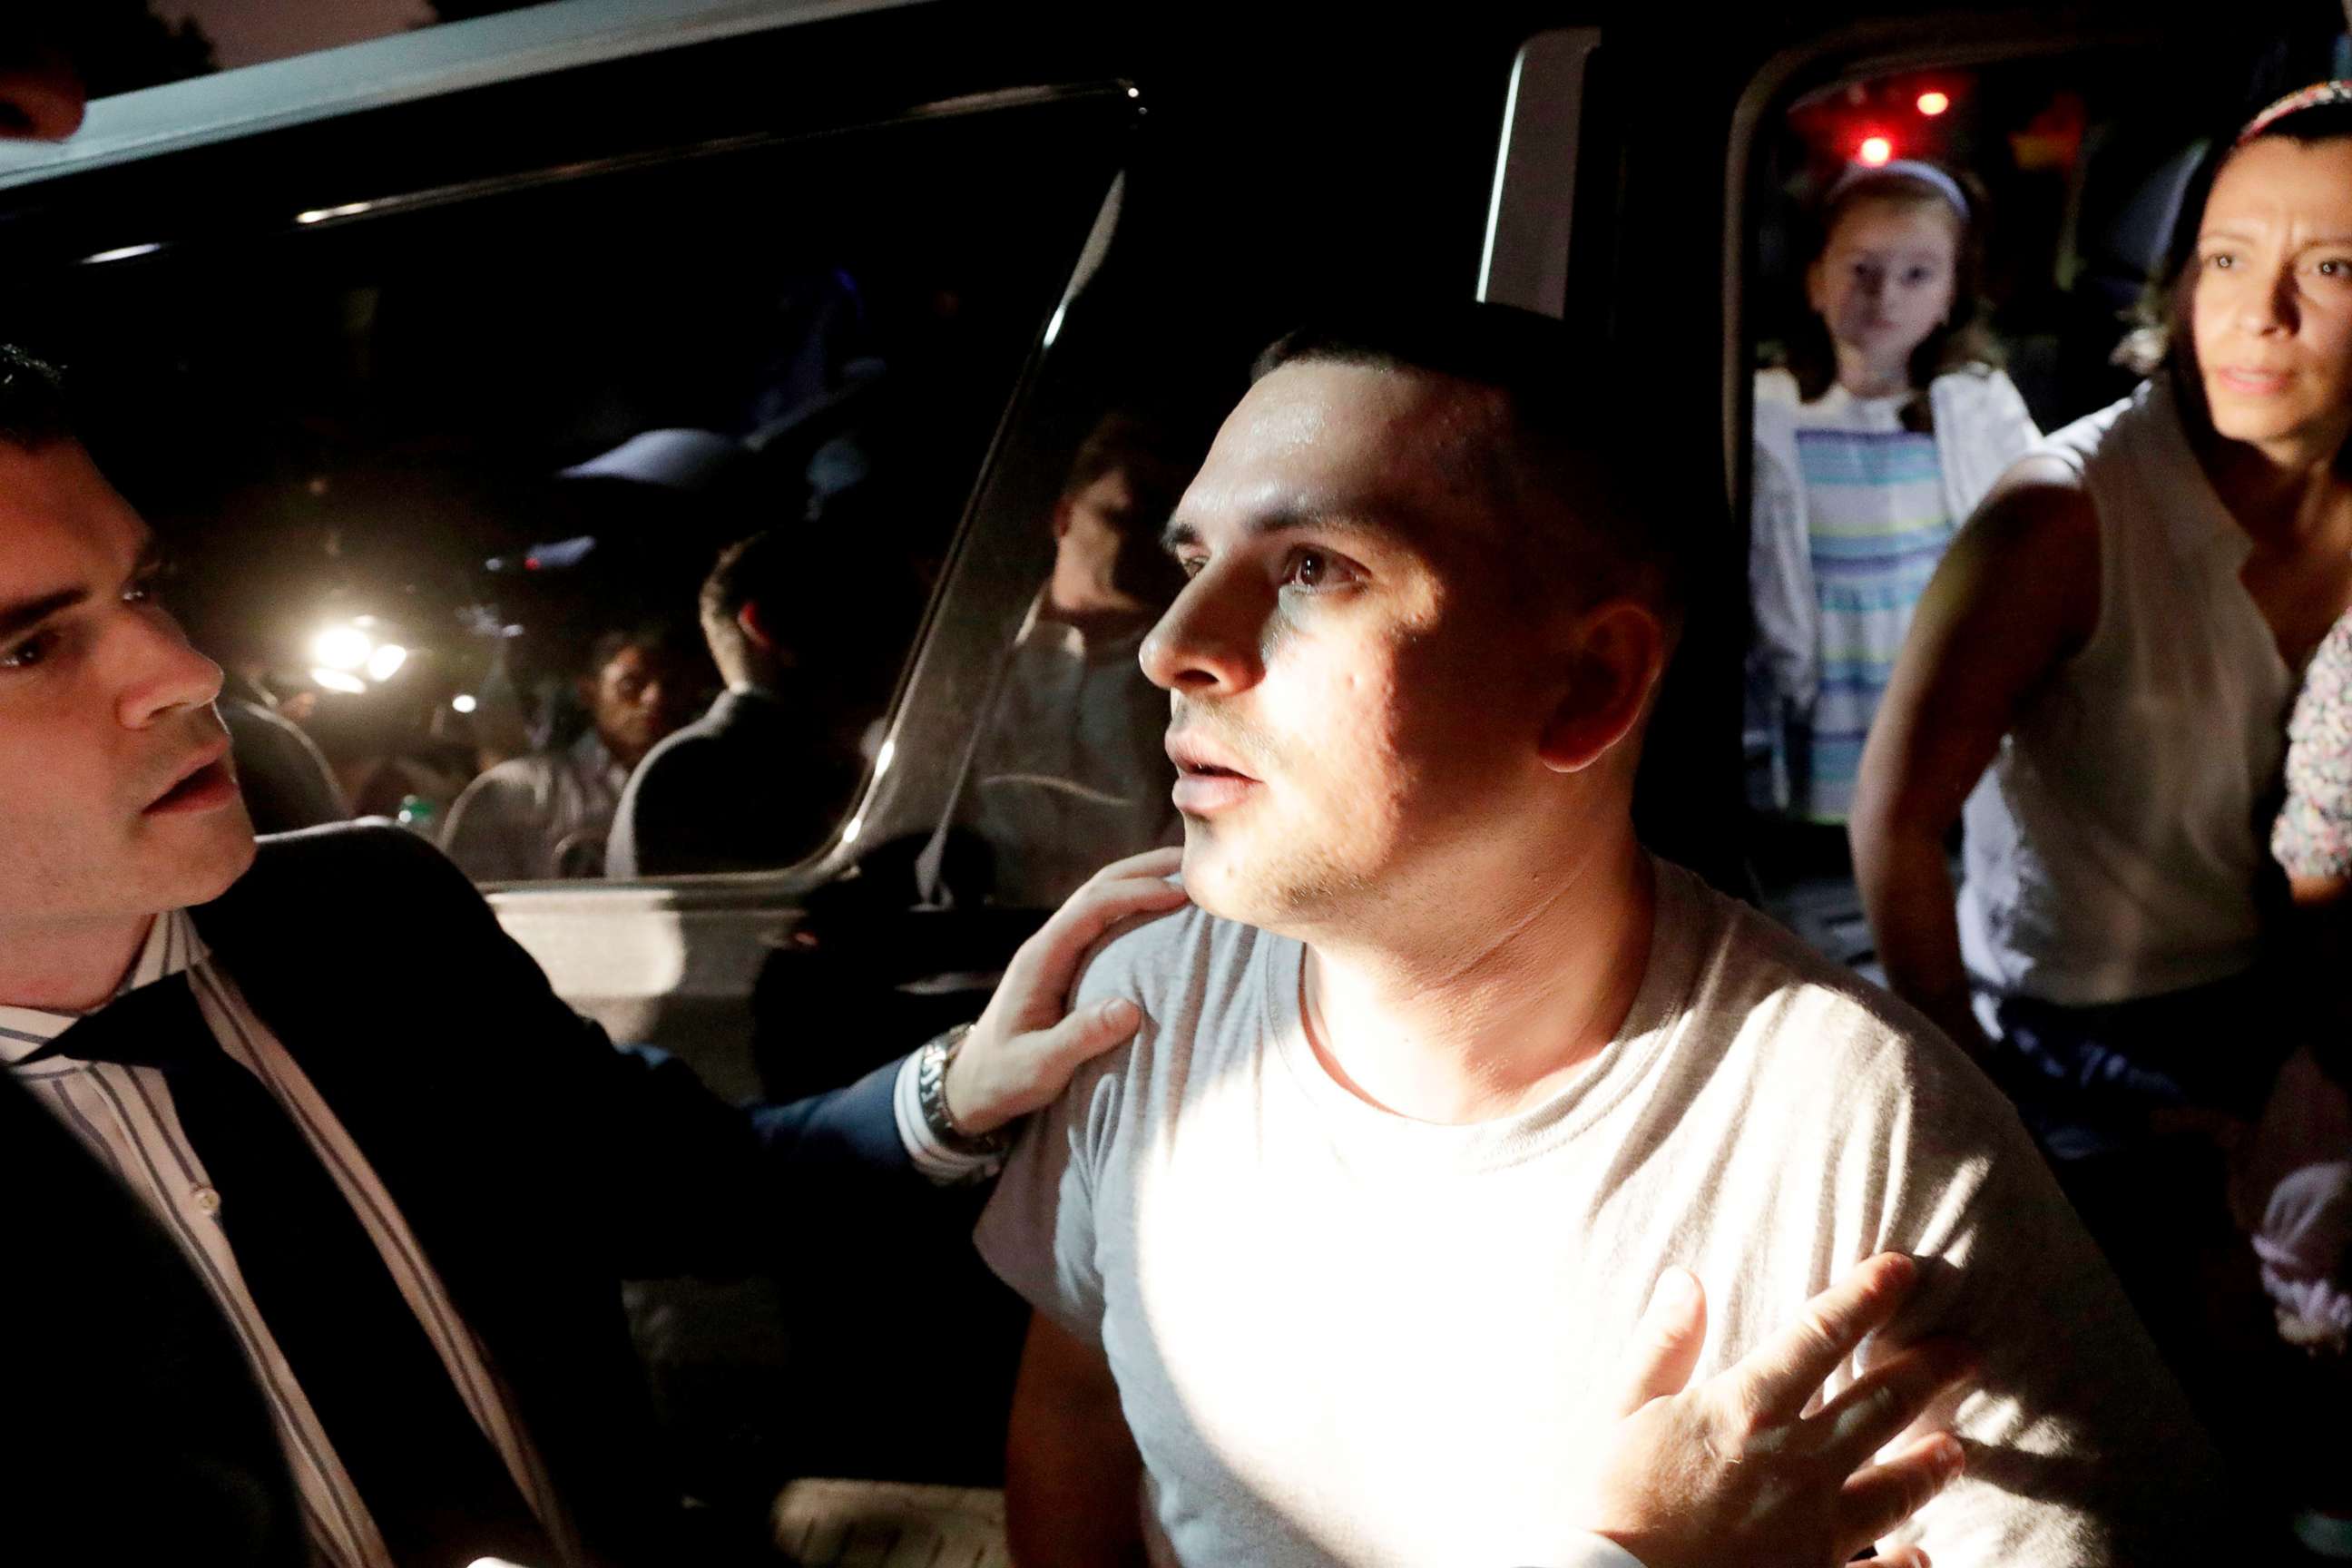 PHOTO: Pablo Villavicencio, center, is helped into an SUV, where his wife, Sandra Chica, right, and their daughters await after he was released from the Hudson County Correctional Facility, July 24, 2018, in Kearny, N.J.